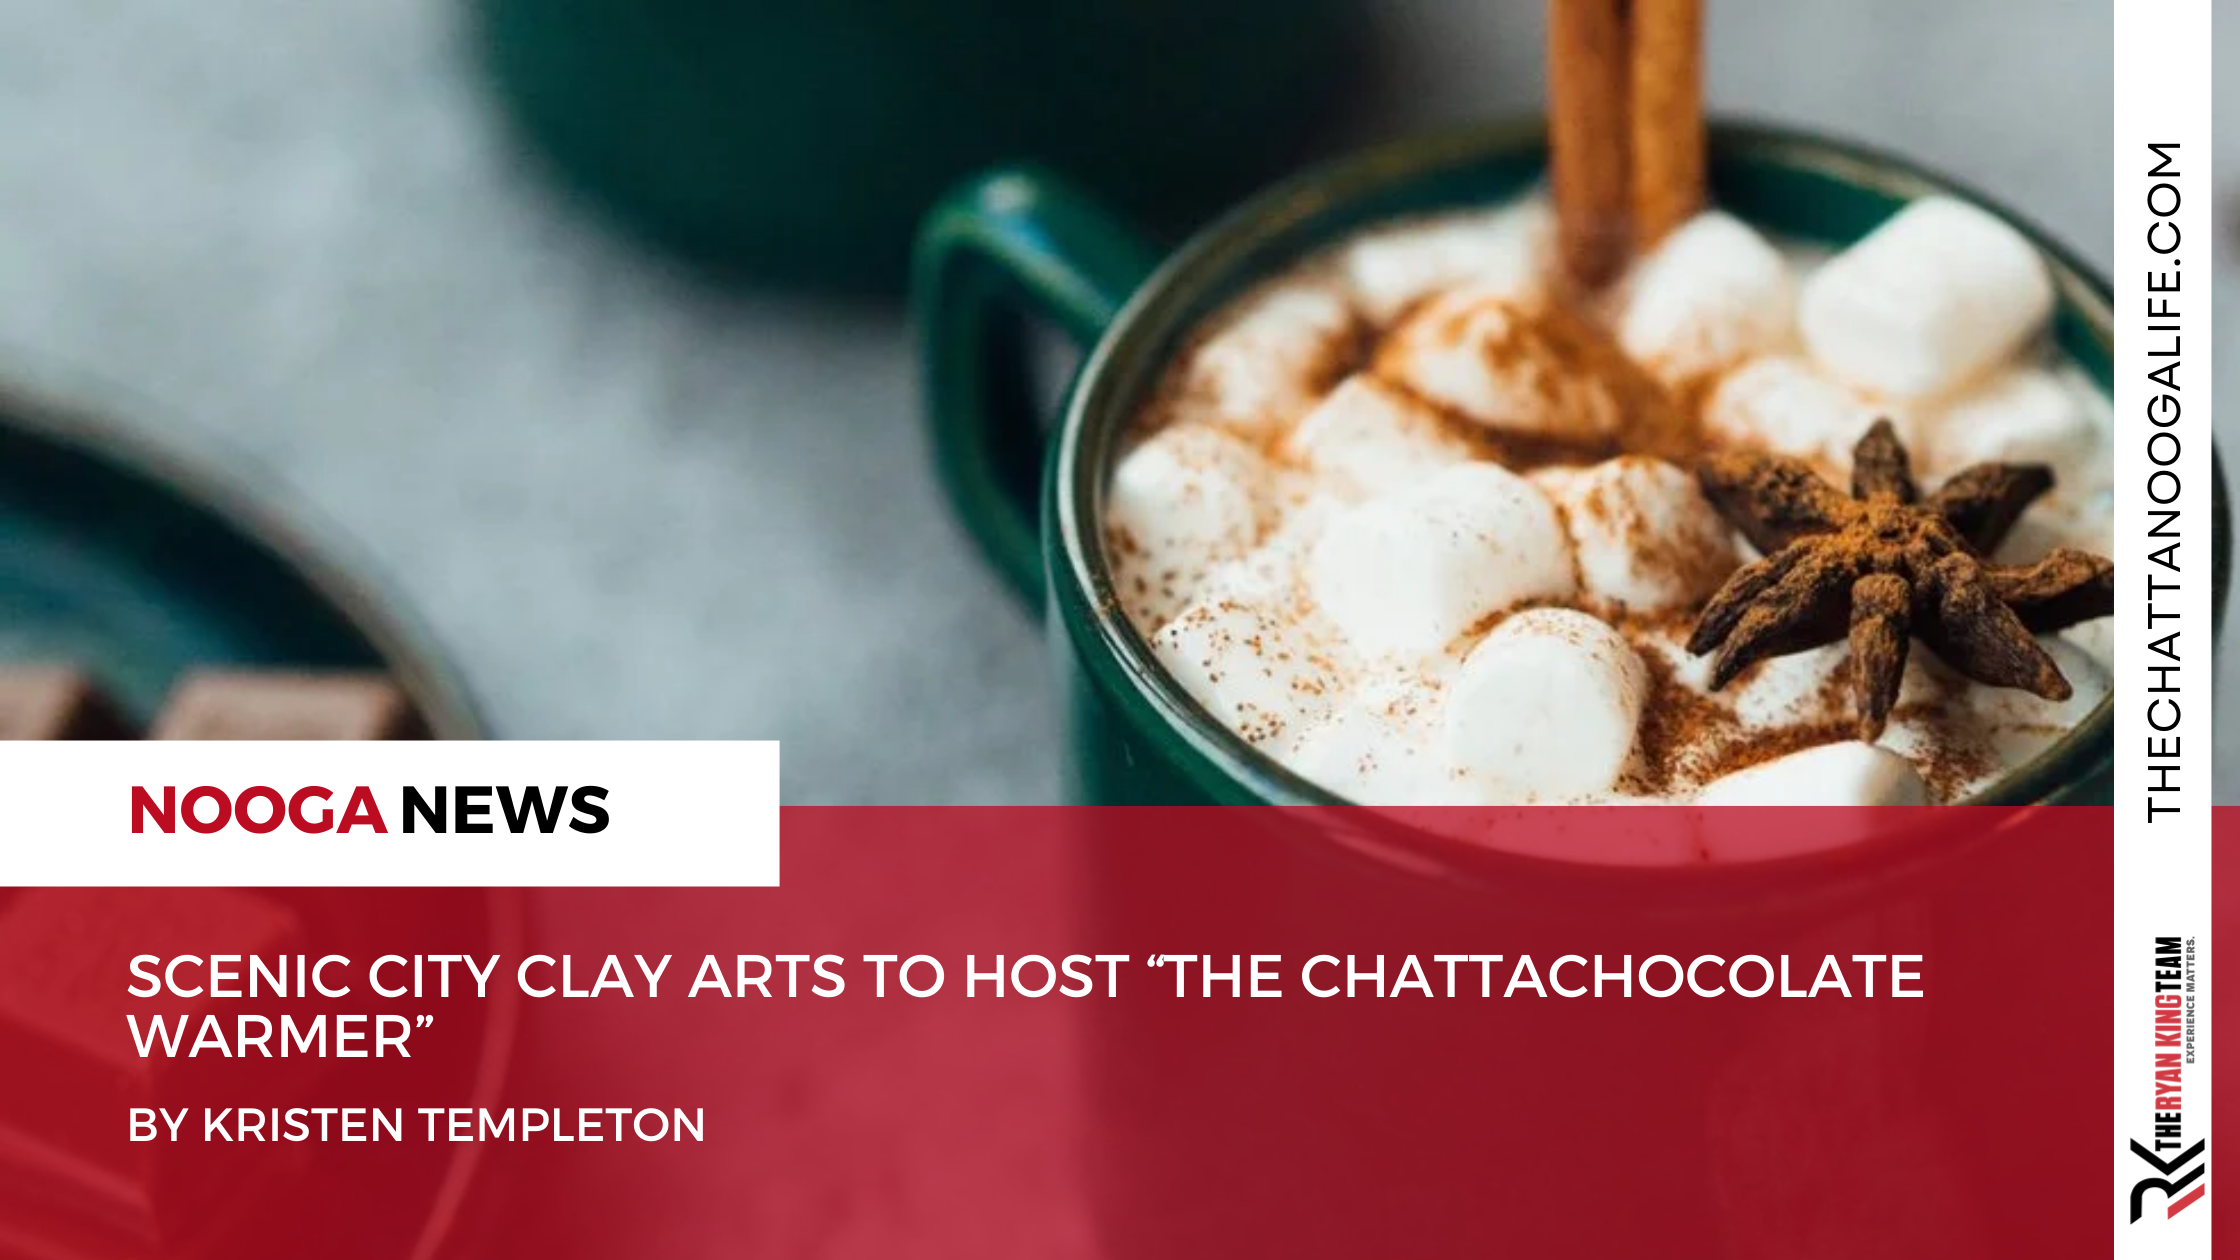 Scenic City Clay Arts to host “The ChattaChocolate Warmer”